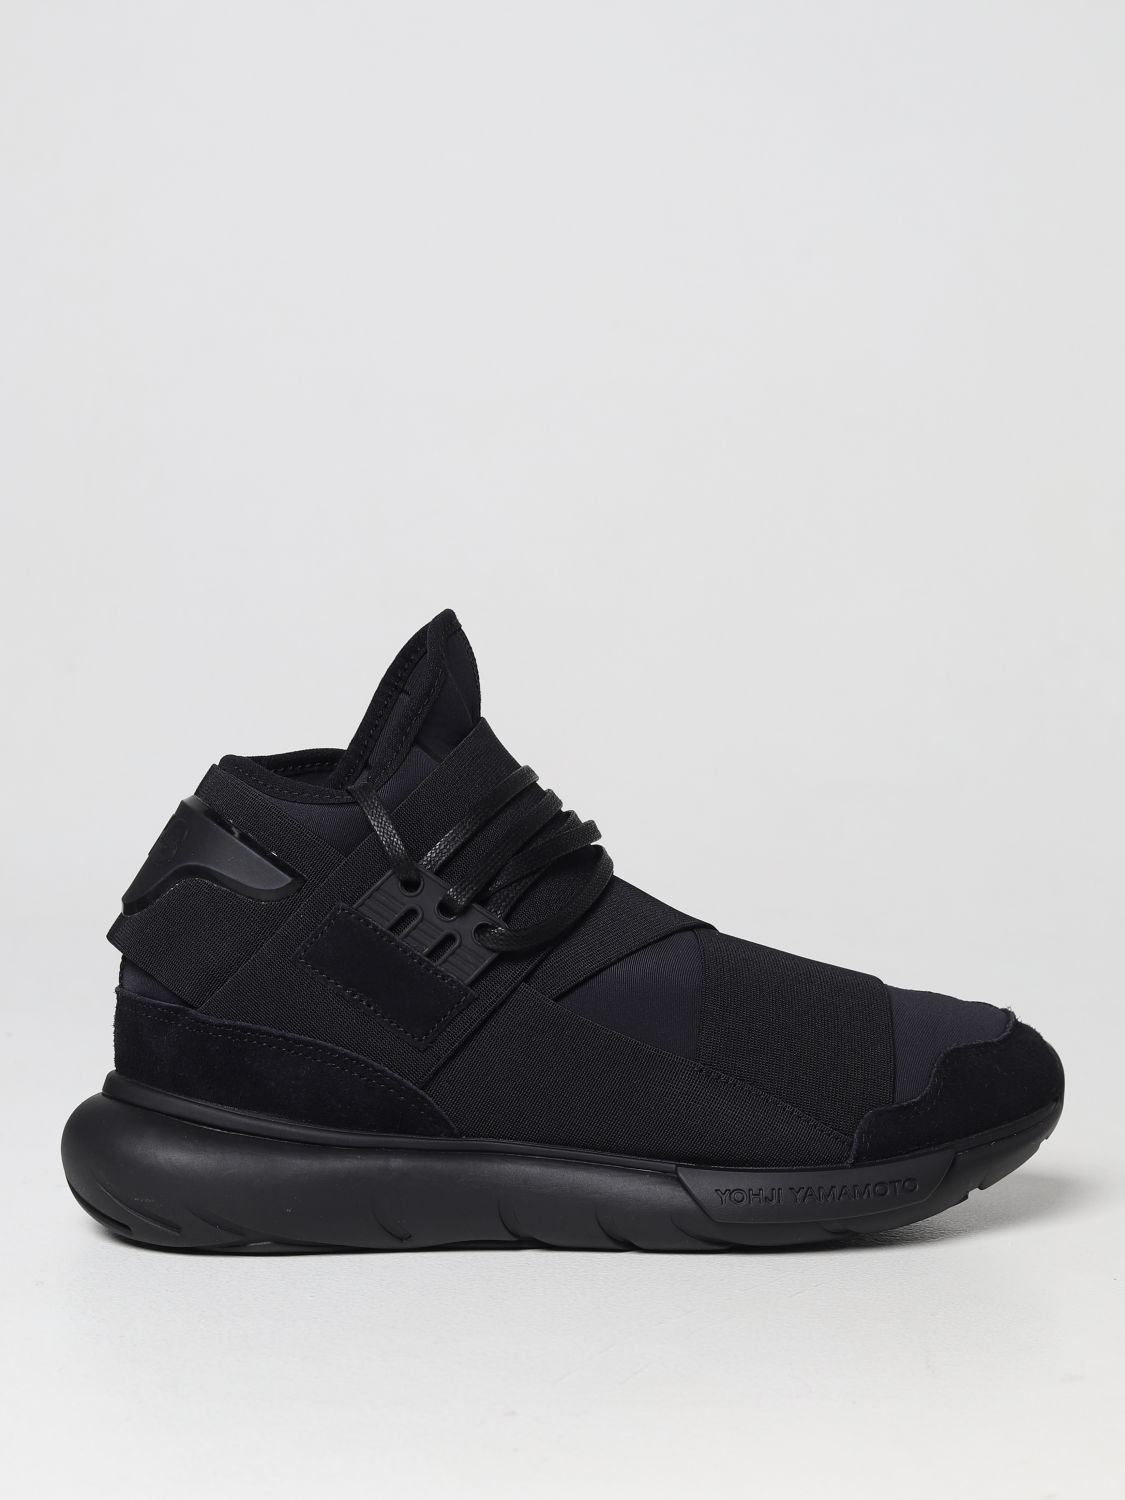 Y-3: sneakers for man Black | sneakers online on GIGLIO.COM